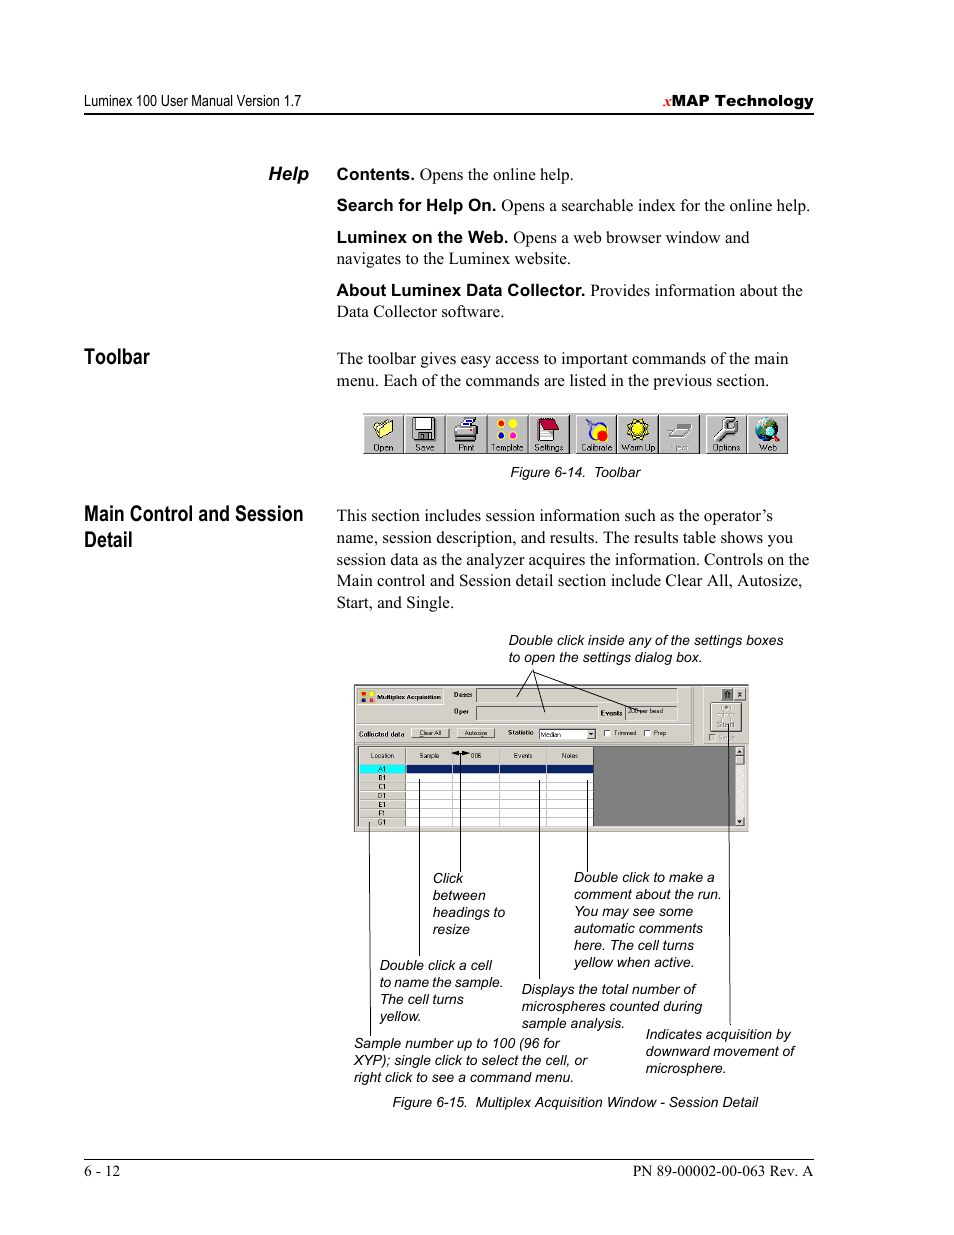 Toolbar, Main control and session detail | Luminex 100 User Manual Version 1.7 User Manual | Page 62 / 146